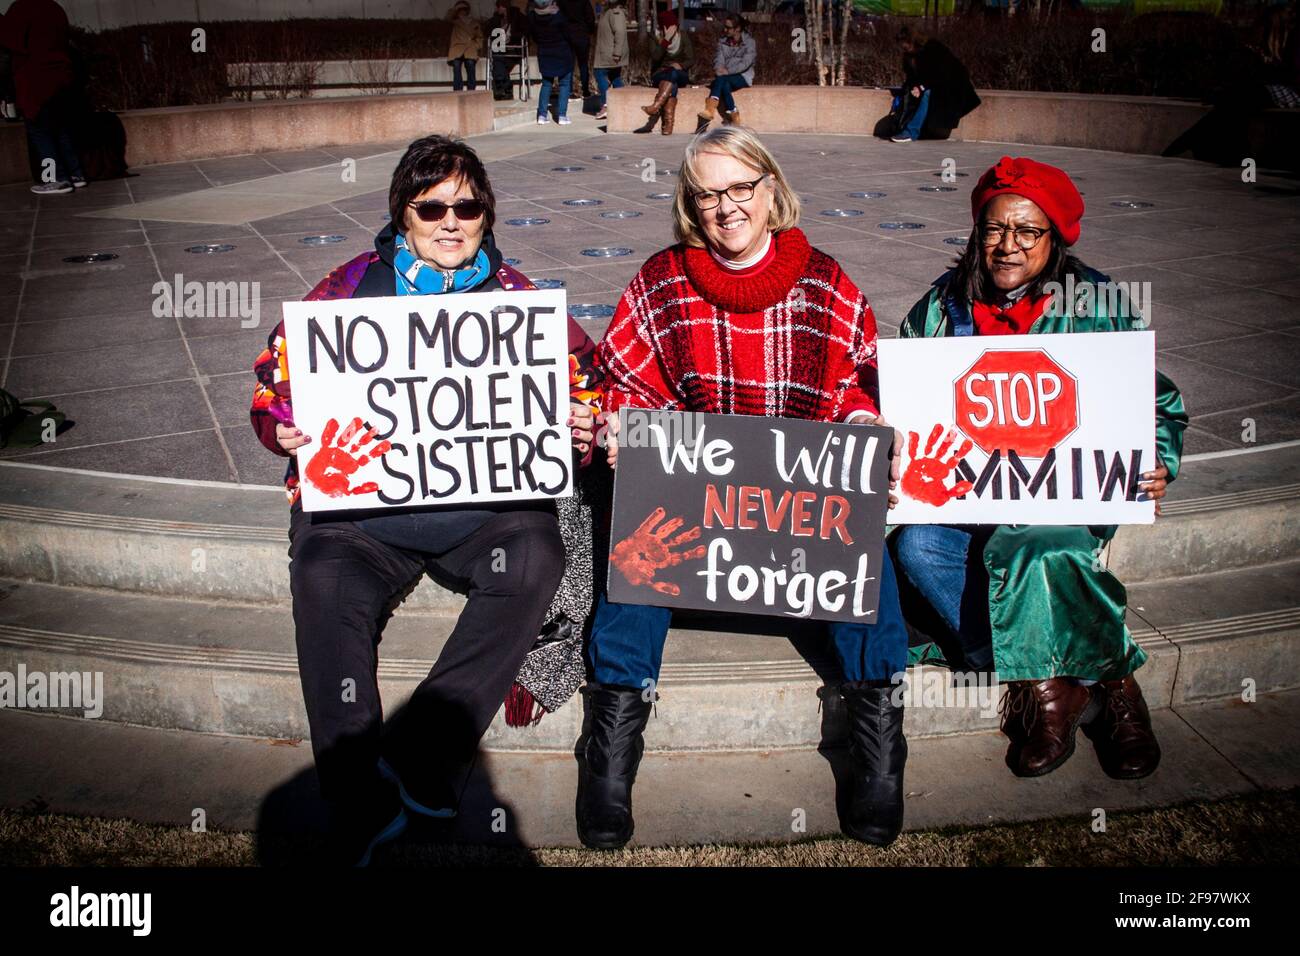 2020 01 18R Tulsa USA Three women sit at protest march in Tulsa with signs - No more stolen sisters We will never forget and Stop MMIW Stock Photo